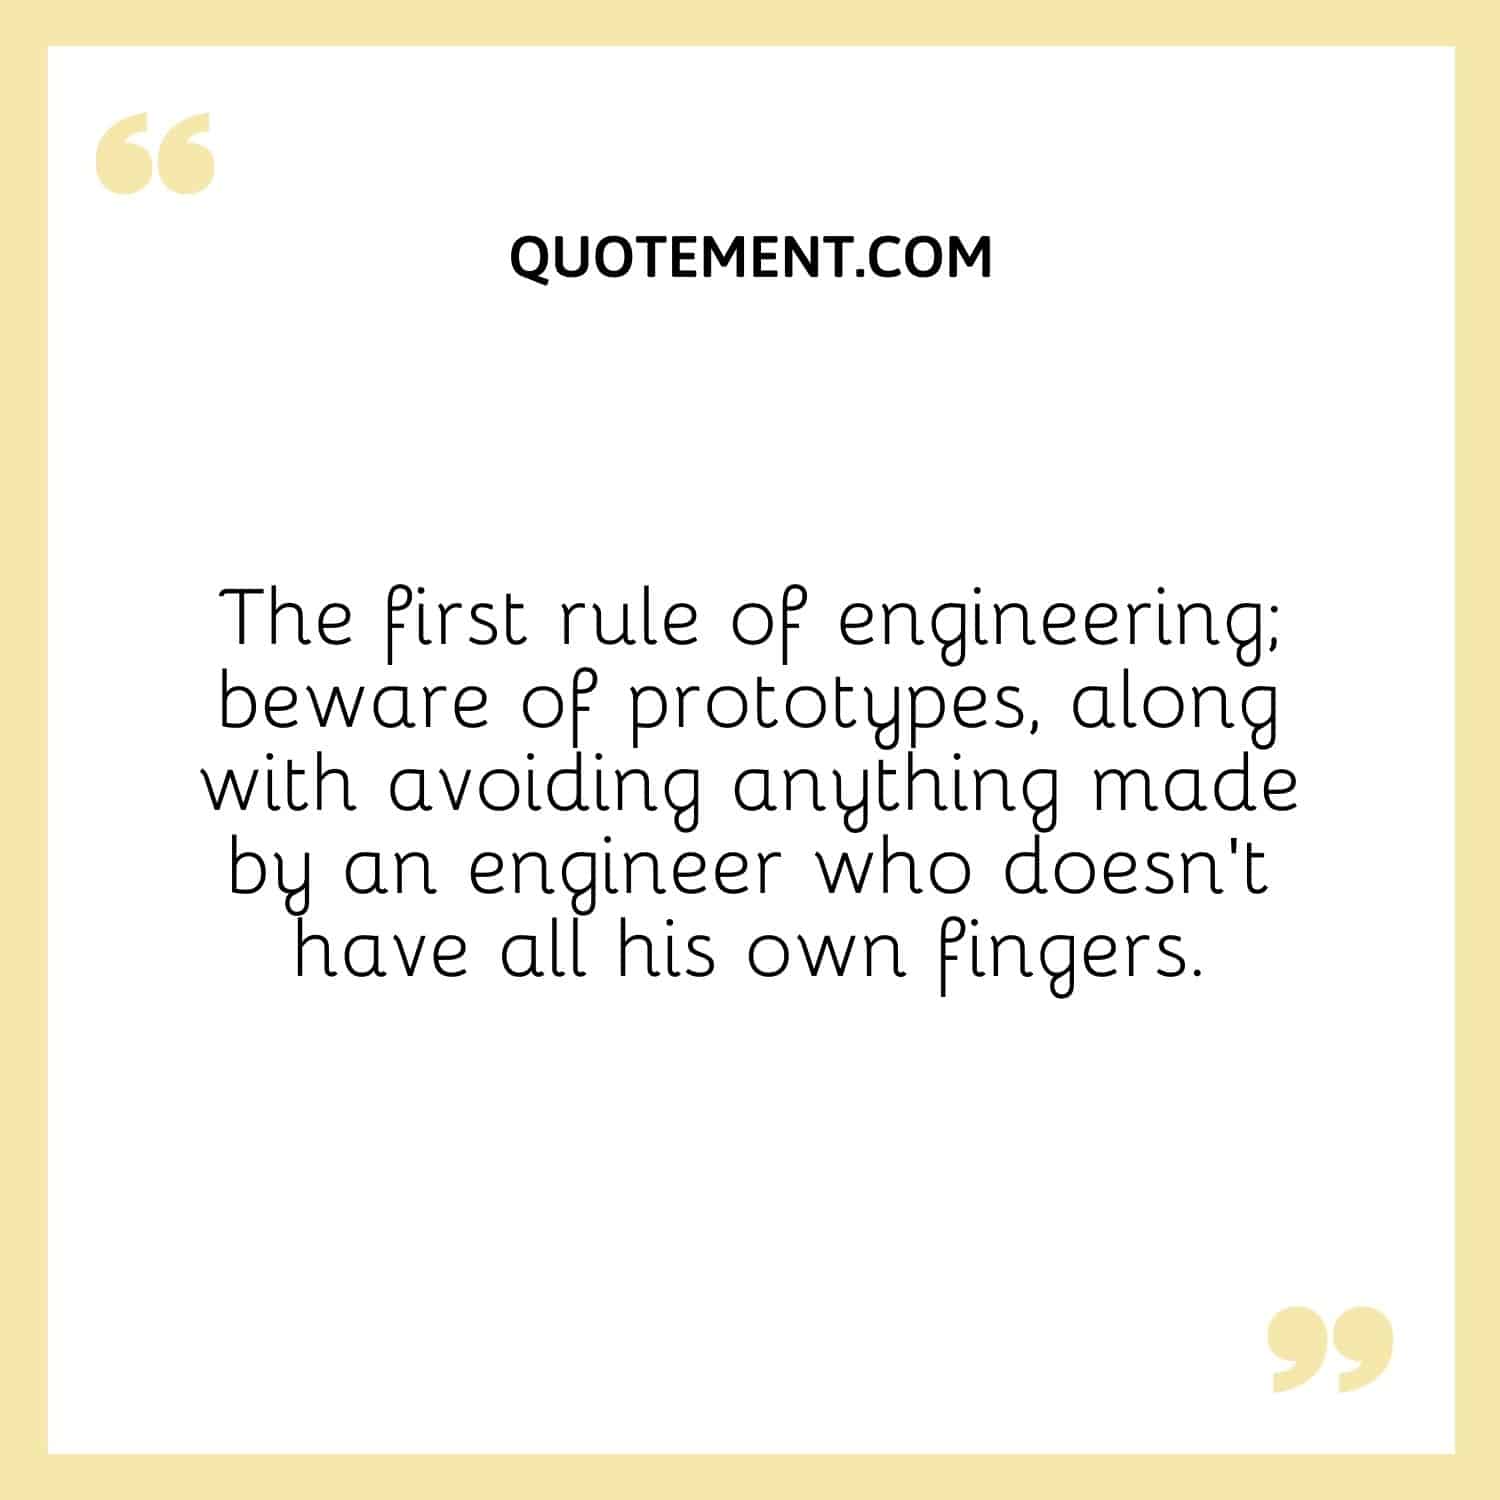 The first rule of engineering; beware of prototypes, along with avoiding anything made by an engineer who doesn’t have all his own fingers.